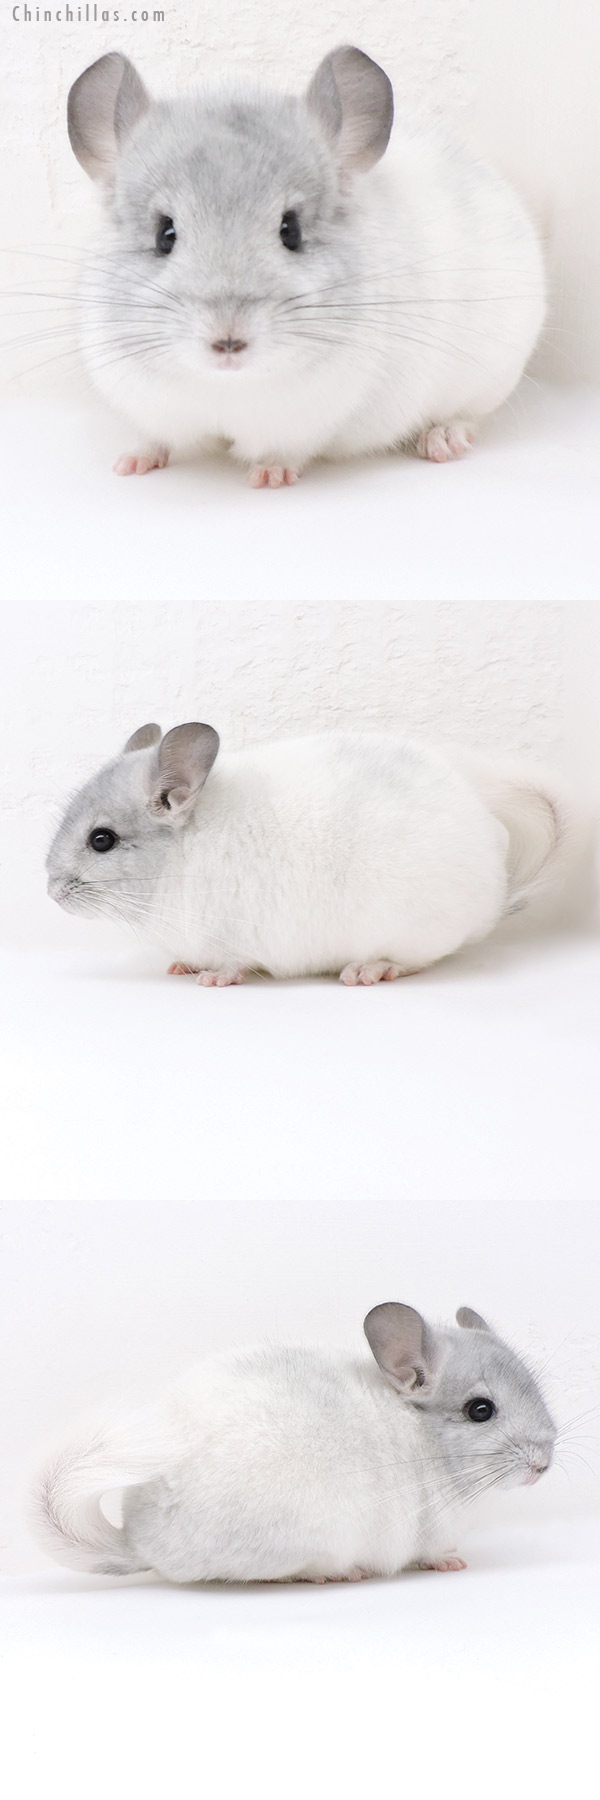 Chinchilla or related item offered for sale or export on Chinchillas.com - 19149 Herd Improvement Quality White Mosaic Male Chinchilla